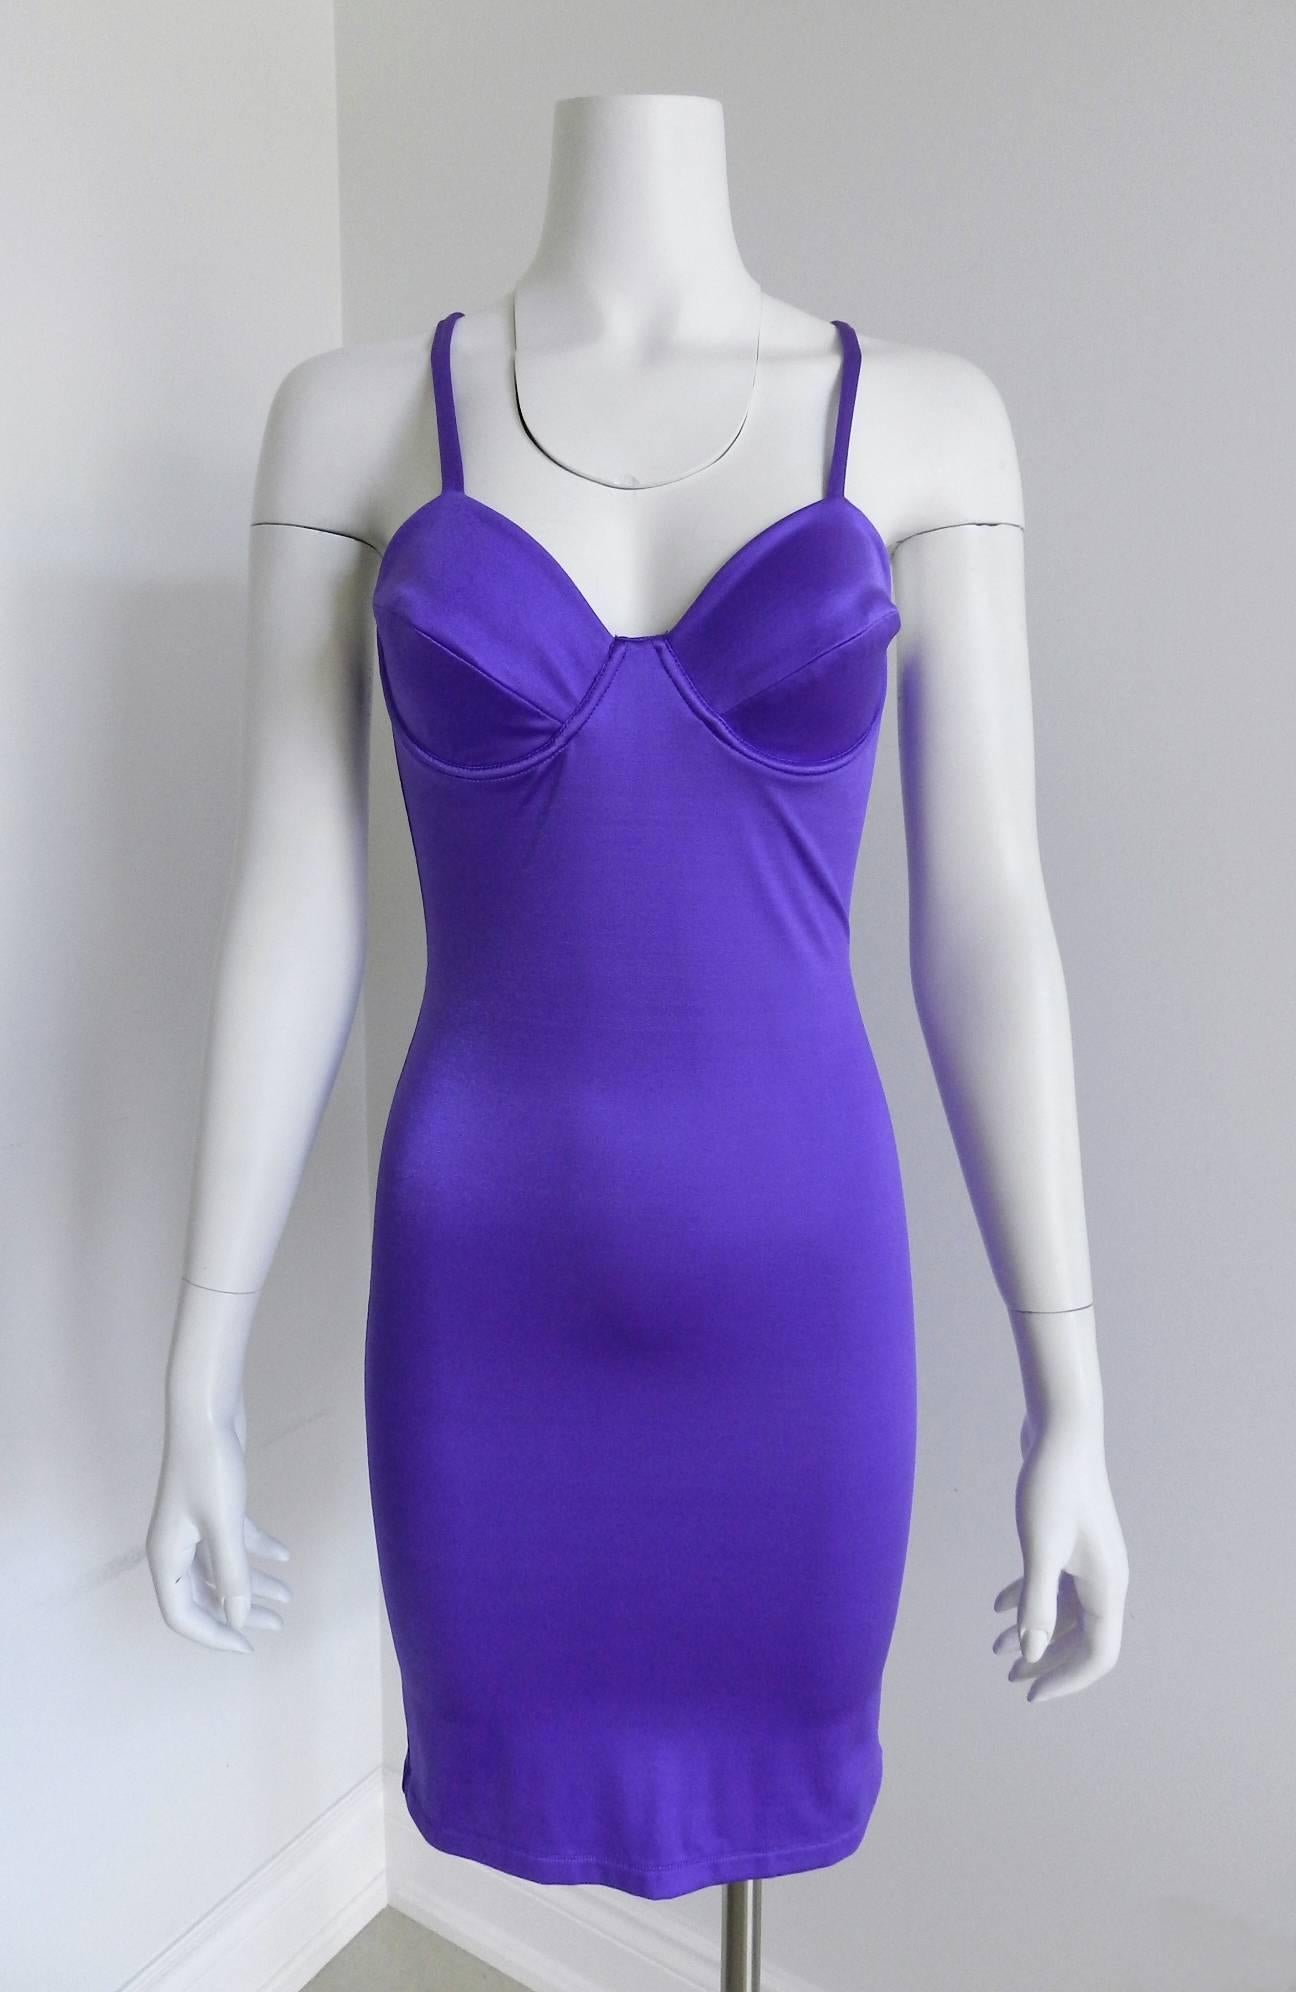 Versus by Gianni Versace Vintage Spring 1994 Electric purple Bodycon Dress 2